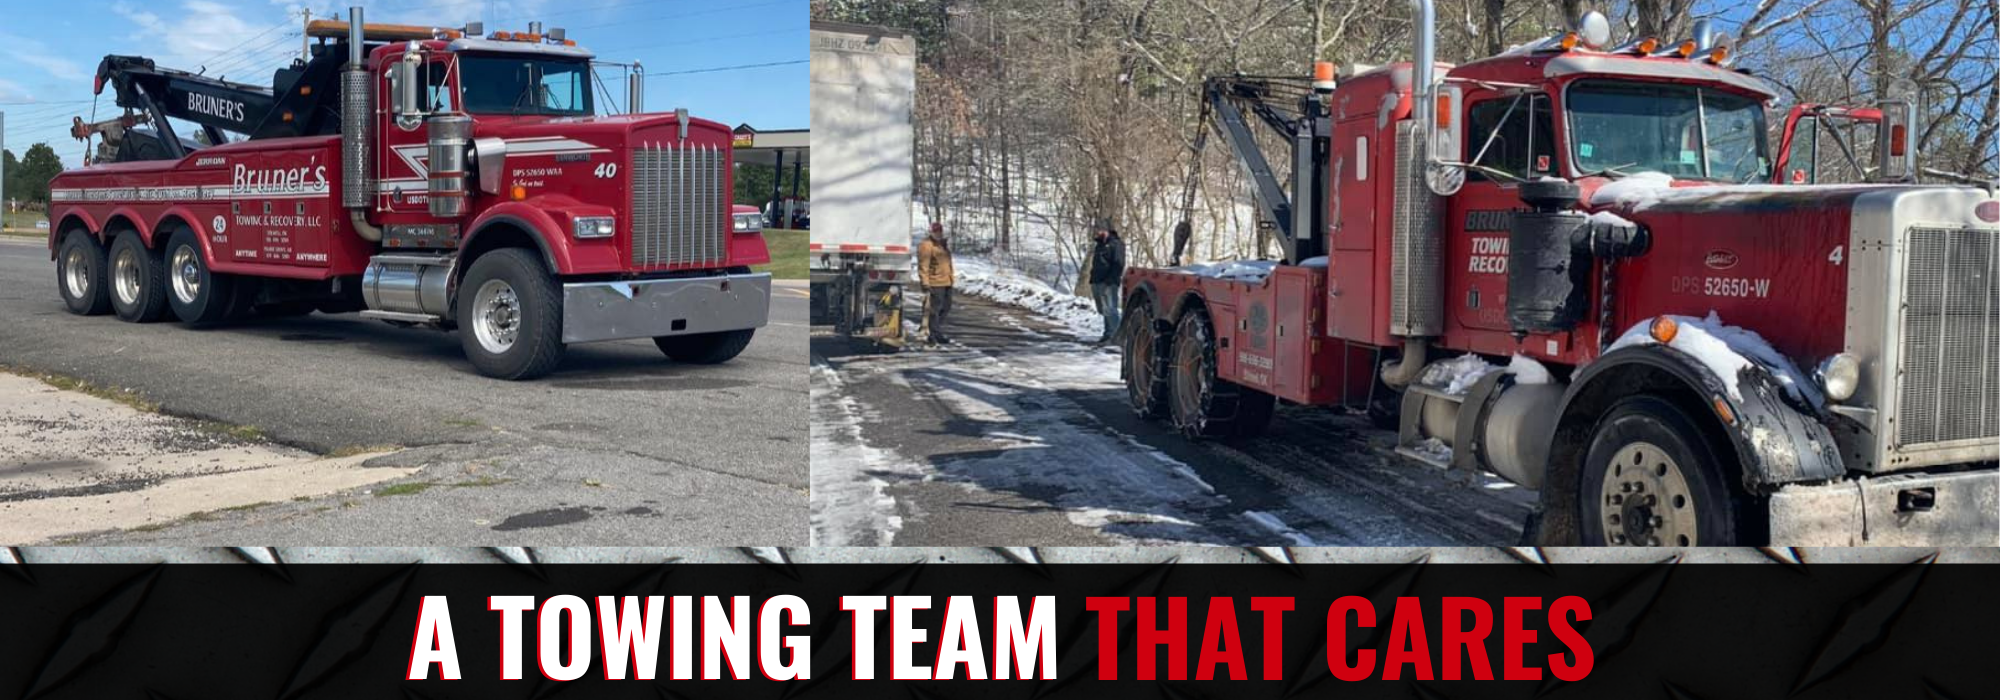 Bruner's Towing and Recovery tow truck collage